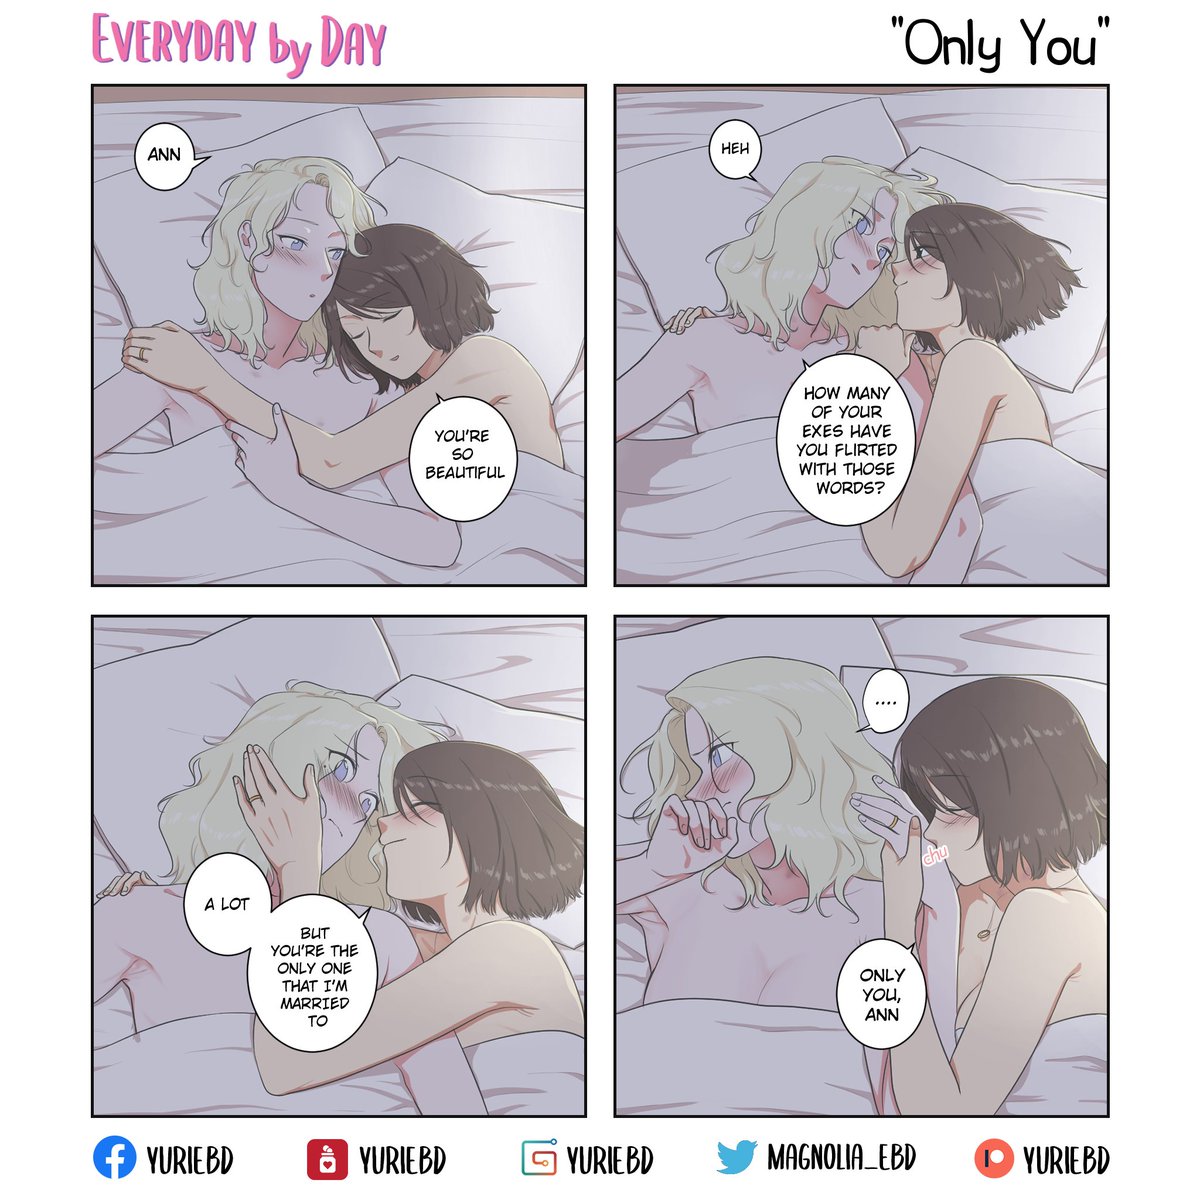 Everyday by Day 4koma - Chap 089  
'Only You' 

Broke your arm!? No need to worry, have your mouth for eating 😋
--- 
#EBD_nadyann #EBD_nadya #EBD_ann #YuriEBD #Magnoliateam